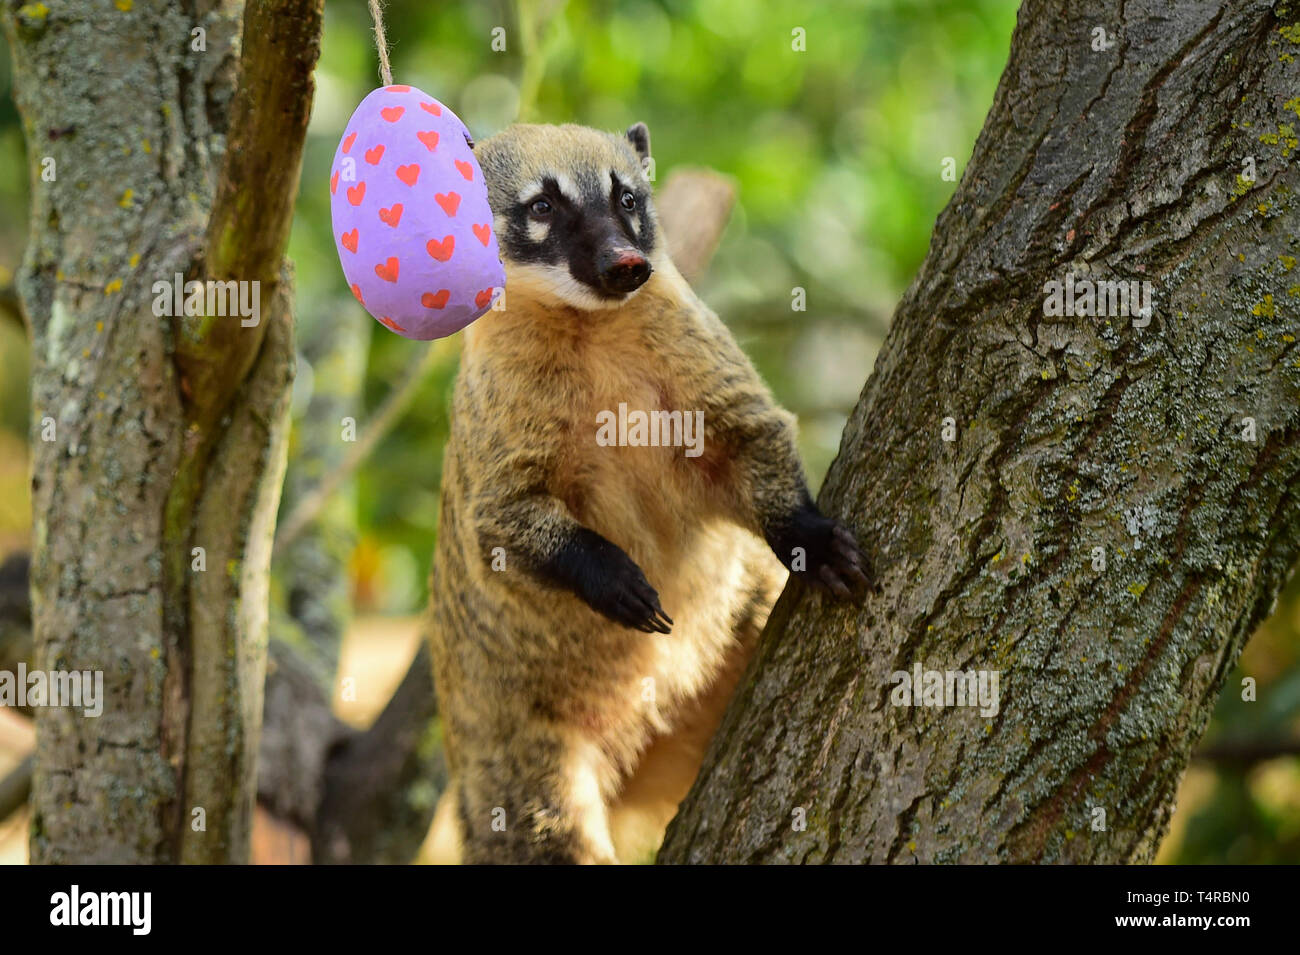 London, UK.  18 April 2019.  Colourful papier-mâché eggs filled with tasty treats are offered to ring-tailed coatis at ZSL London Zoo in the run up to Easter.  Credit: Stephen Chung / Alamy Live News Stock Photo